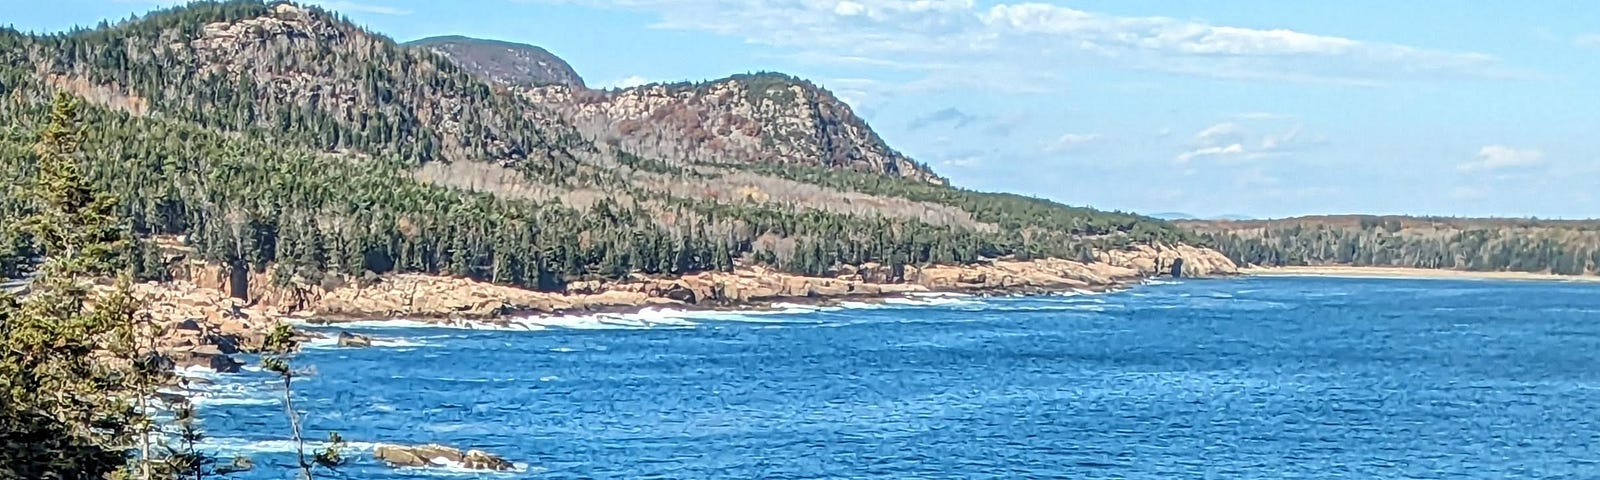 A view of rocky granite shoreline and hills.